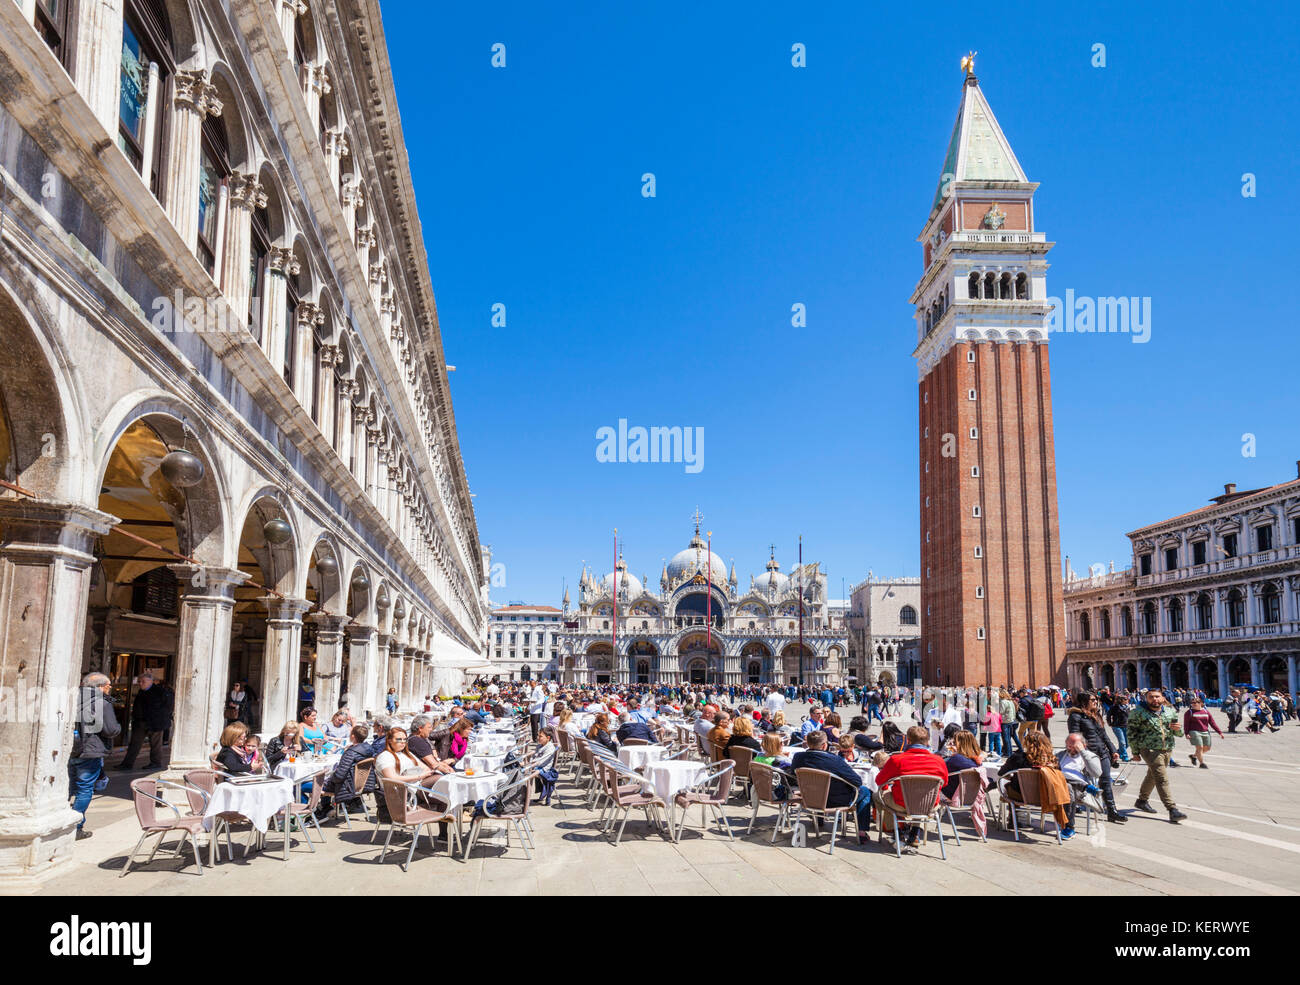 VENICE ITALY VENICE Cafes in St marks Square Piazza san marco in front of the Campanile and basilica di san marco  St. Mark’s Basilica Venice italy Stock Photo